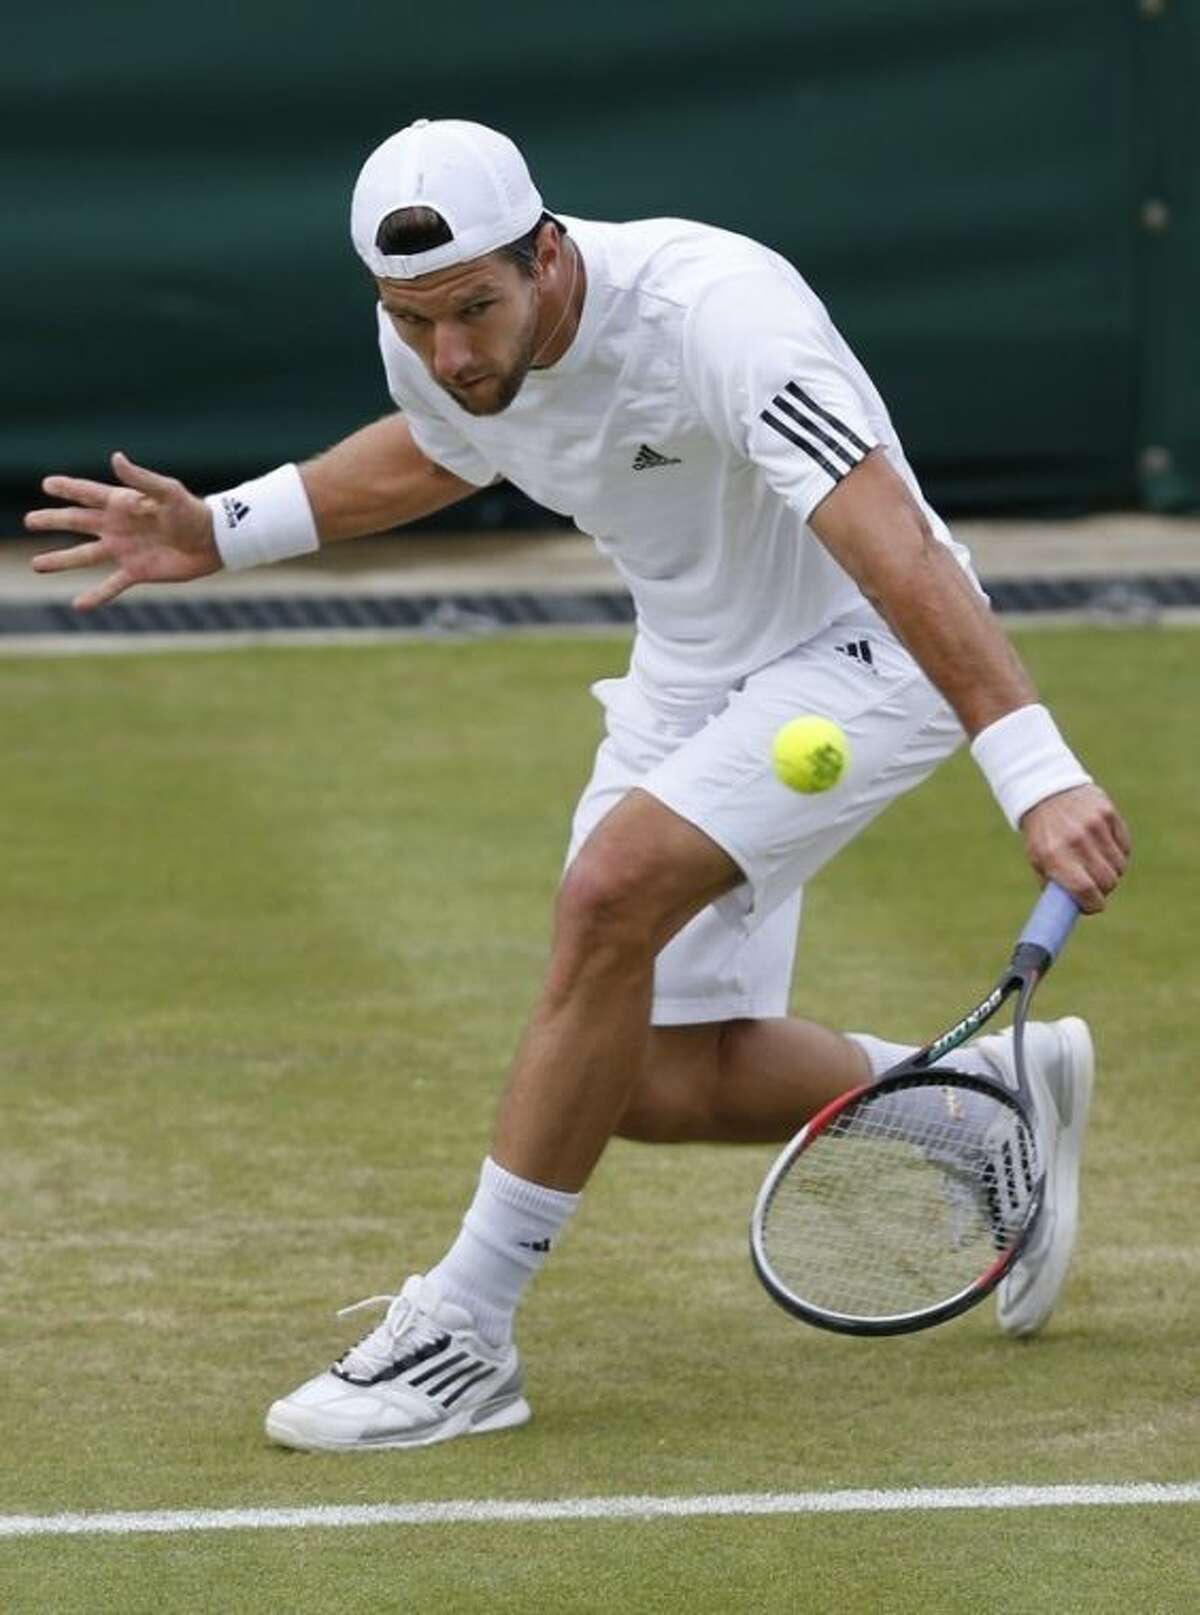 Jurgen Melzer of Austria plays a return to Sergiy Stakhovsky of Ukraine during their Men's second round singles match at the All England Lawn Tennis Championships in Wimbledon, London, Friday, June 28, 2013. (AP Photo/Sang Tan)